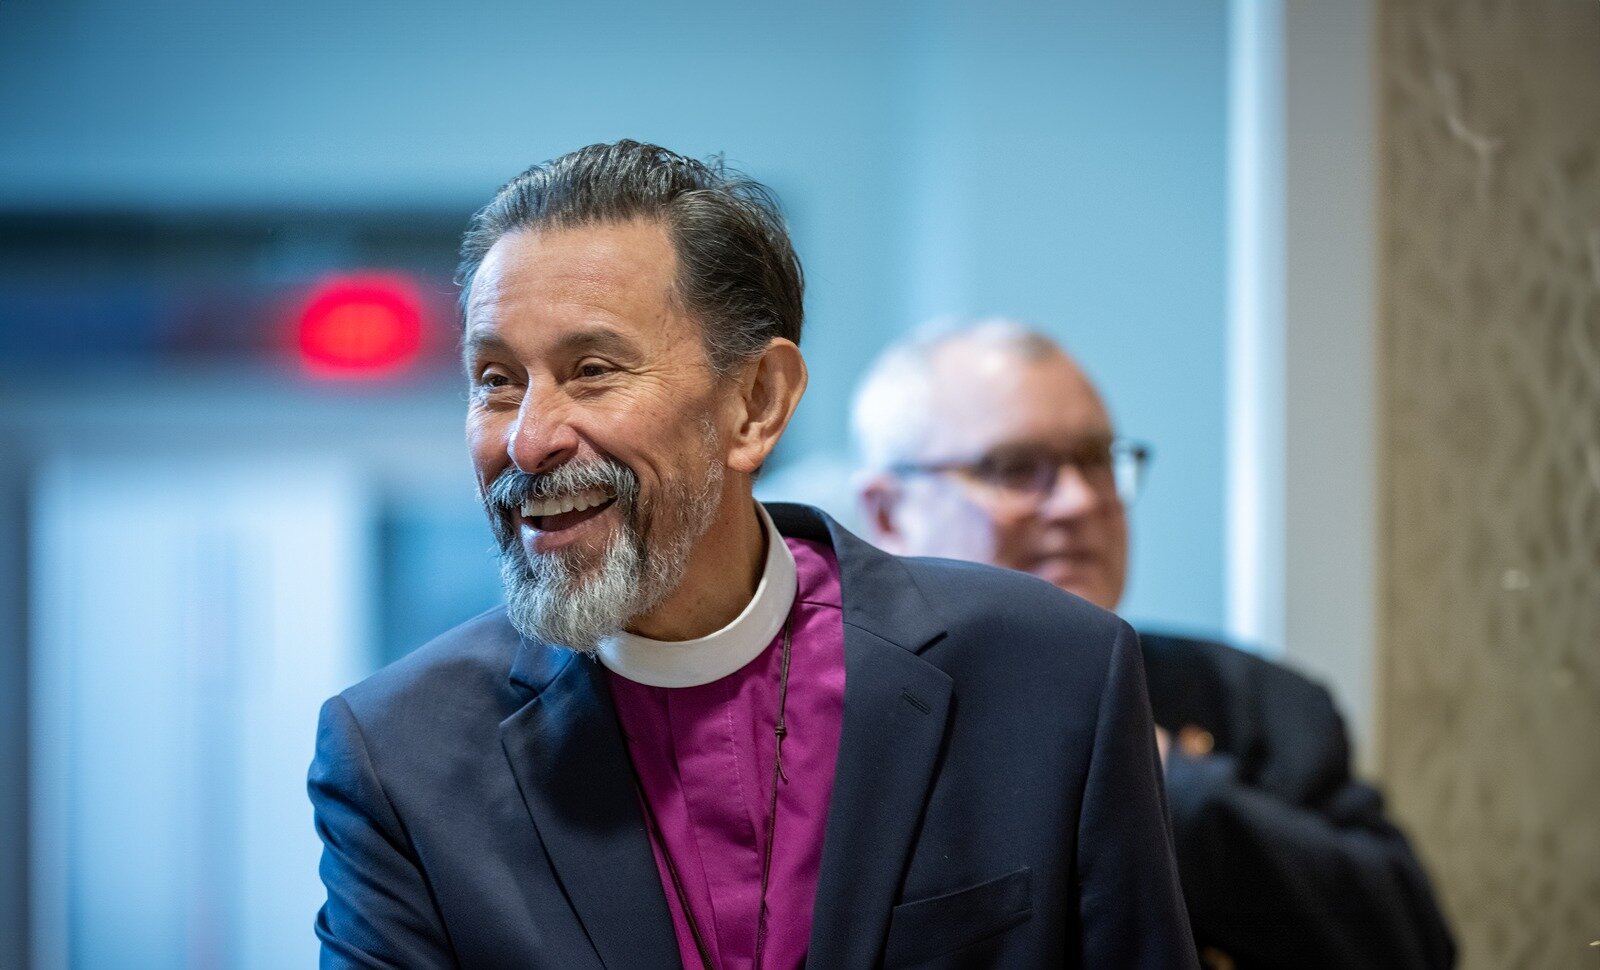 Bishop Daniel G.P. Guti&eacute;rrez will be celebrating with us THIS Sunday morning, November 19th, at 9:00am. All are welcome to worship with us and stay after for a reception!

#diopa #episcopal #standrewsbythelake #sundayservice #sundaymorning #bi